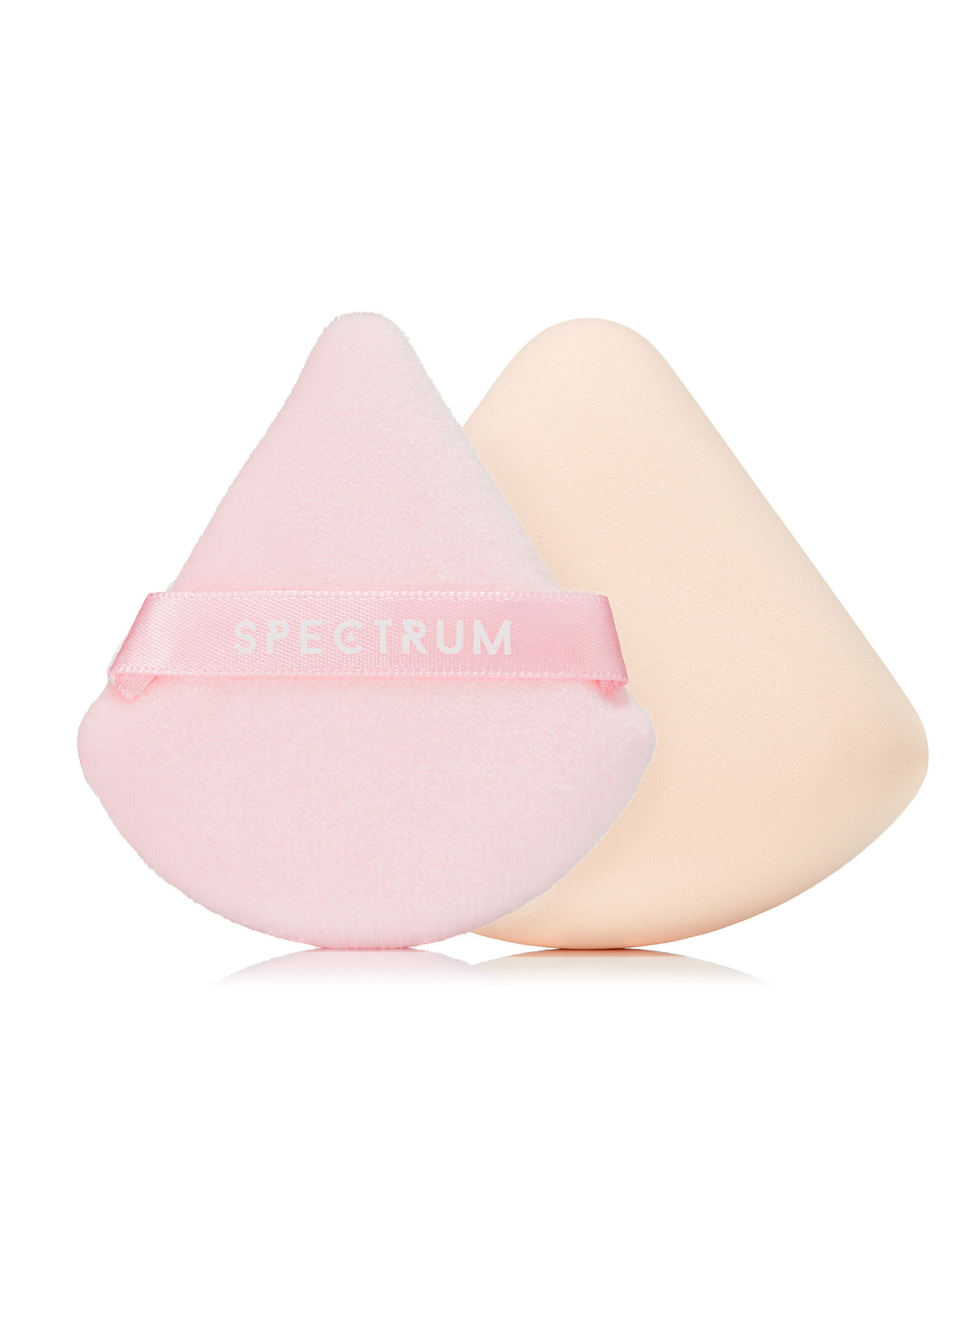 Spectrum Pink Velour & Marble Rubycell Makeup Puff Duo